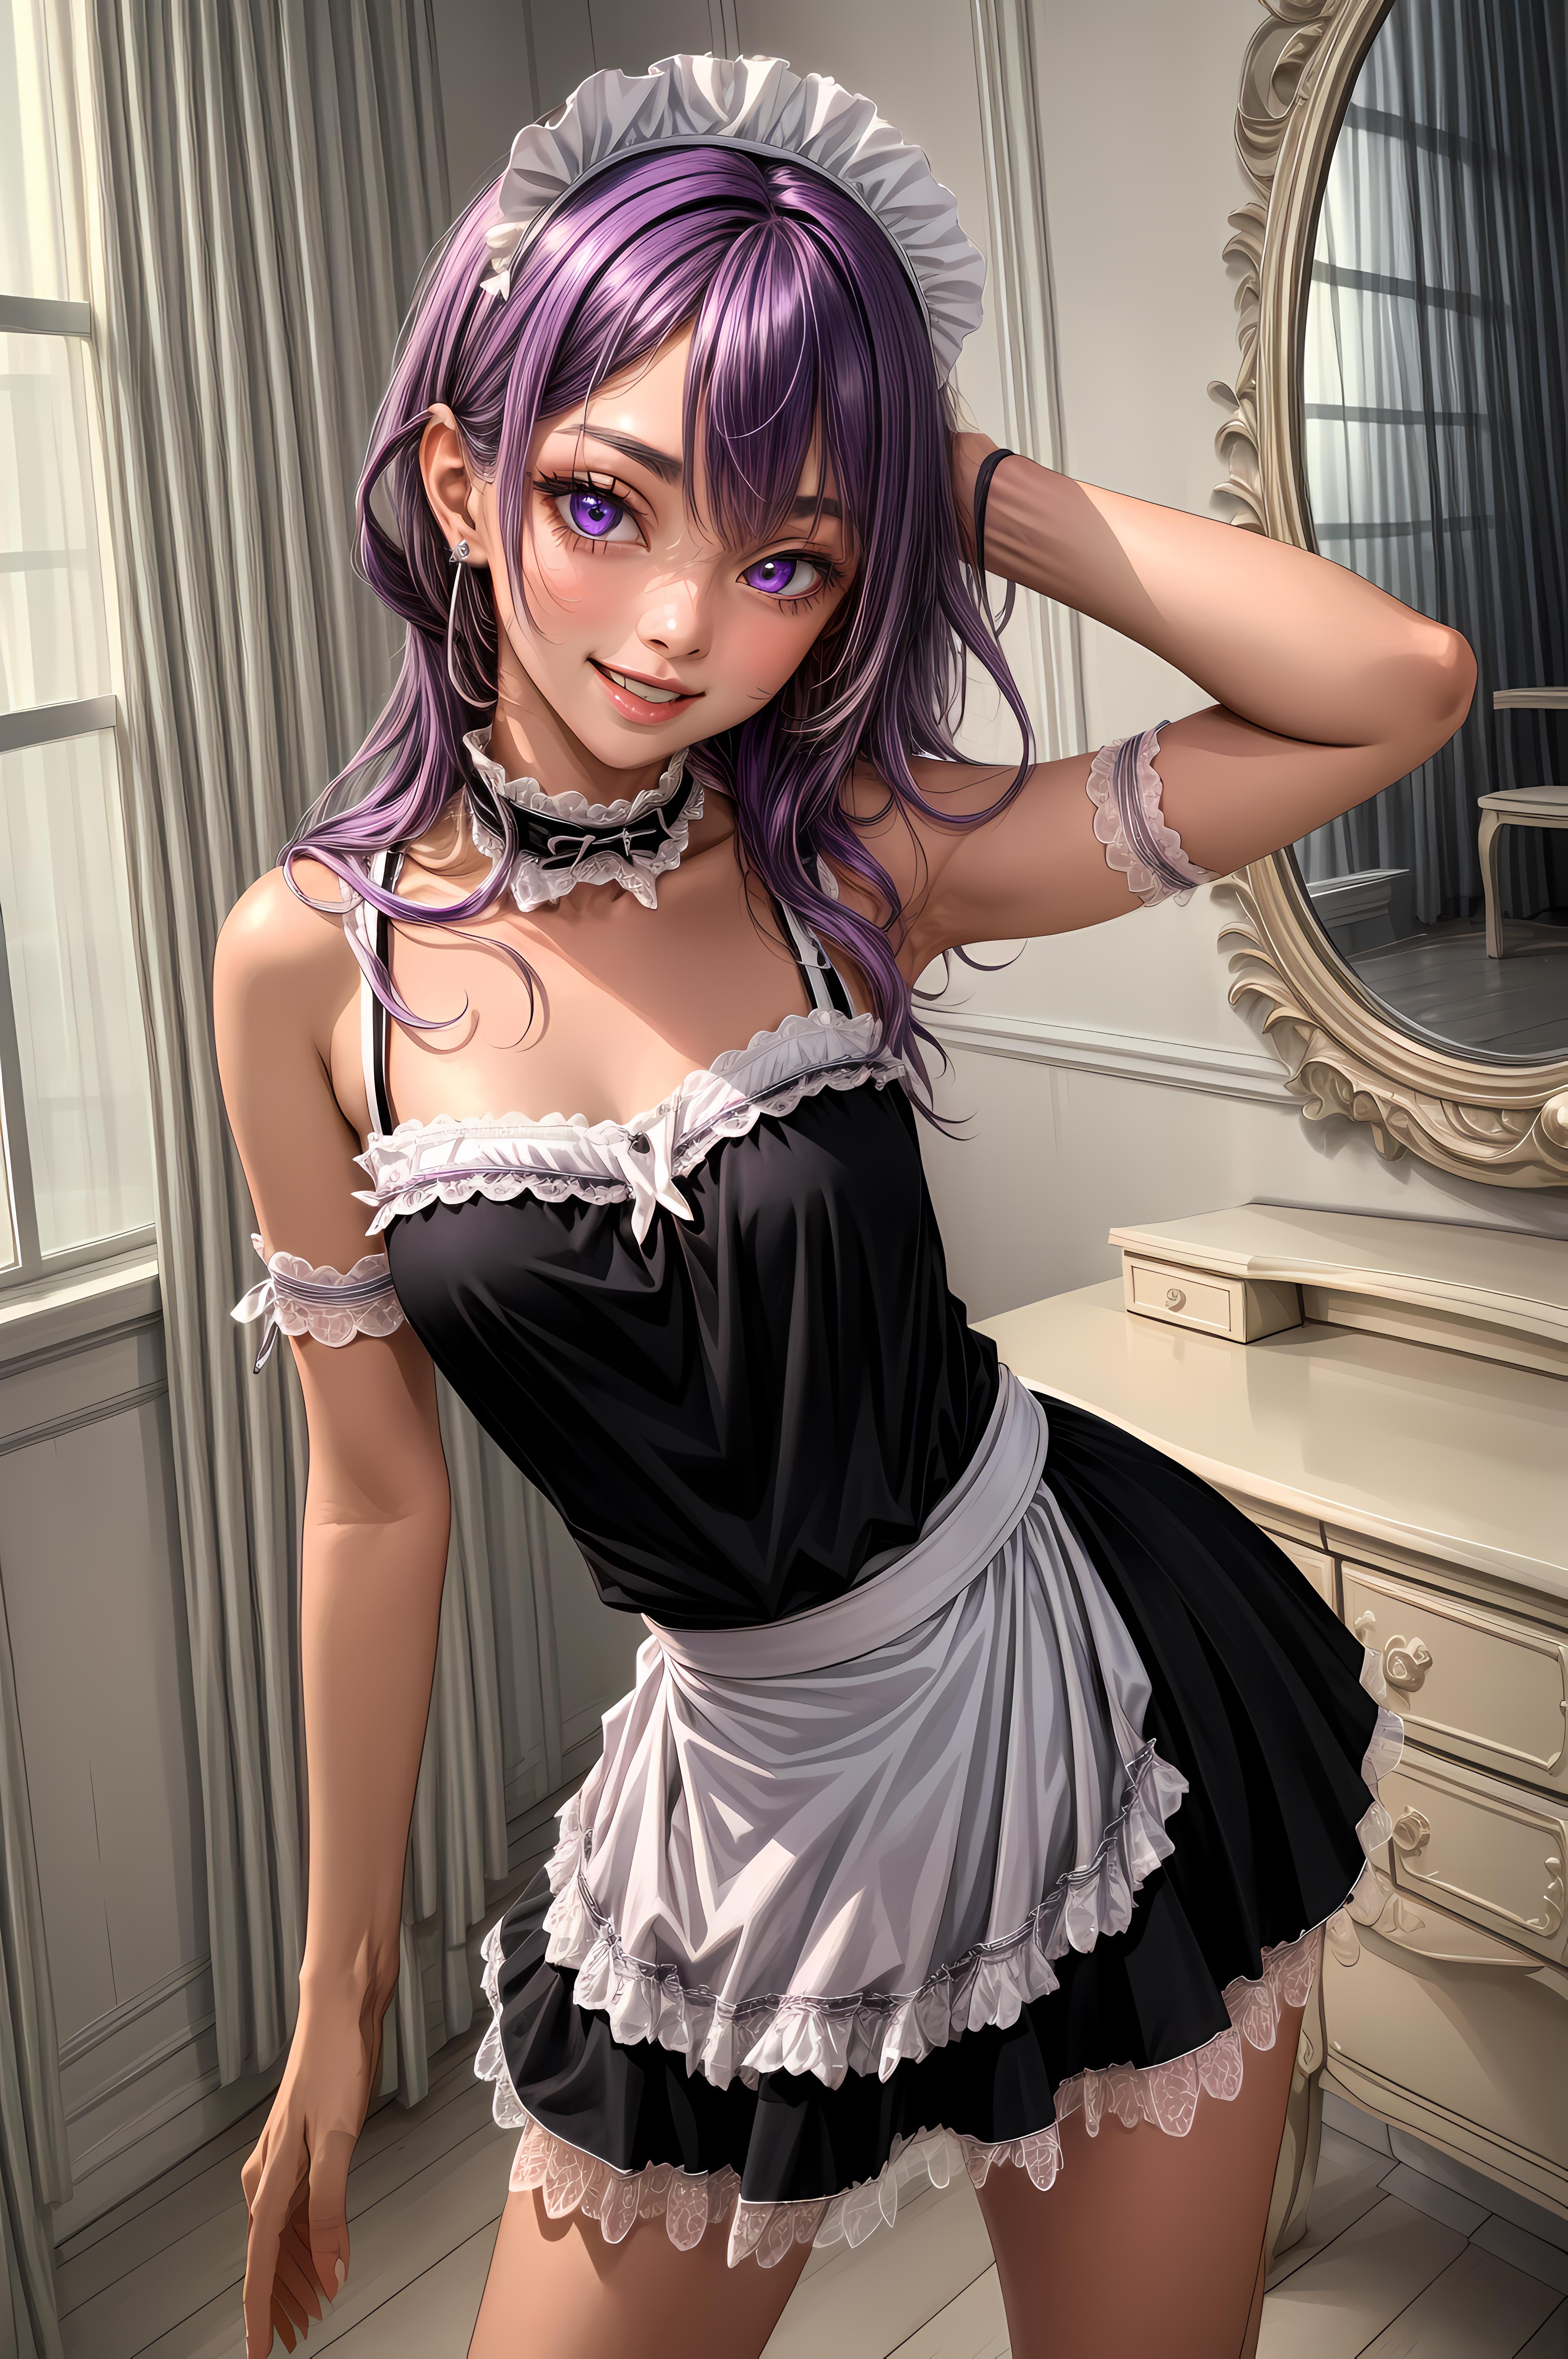 Maid costume №4 image by Faxtron